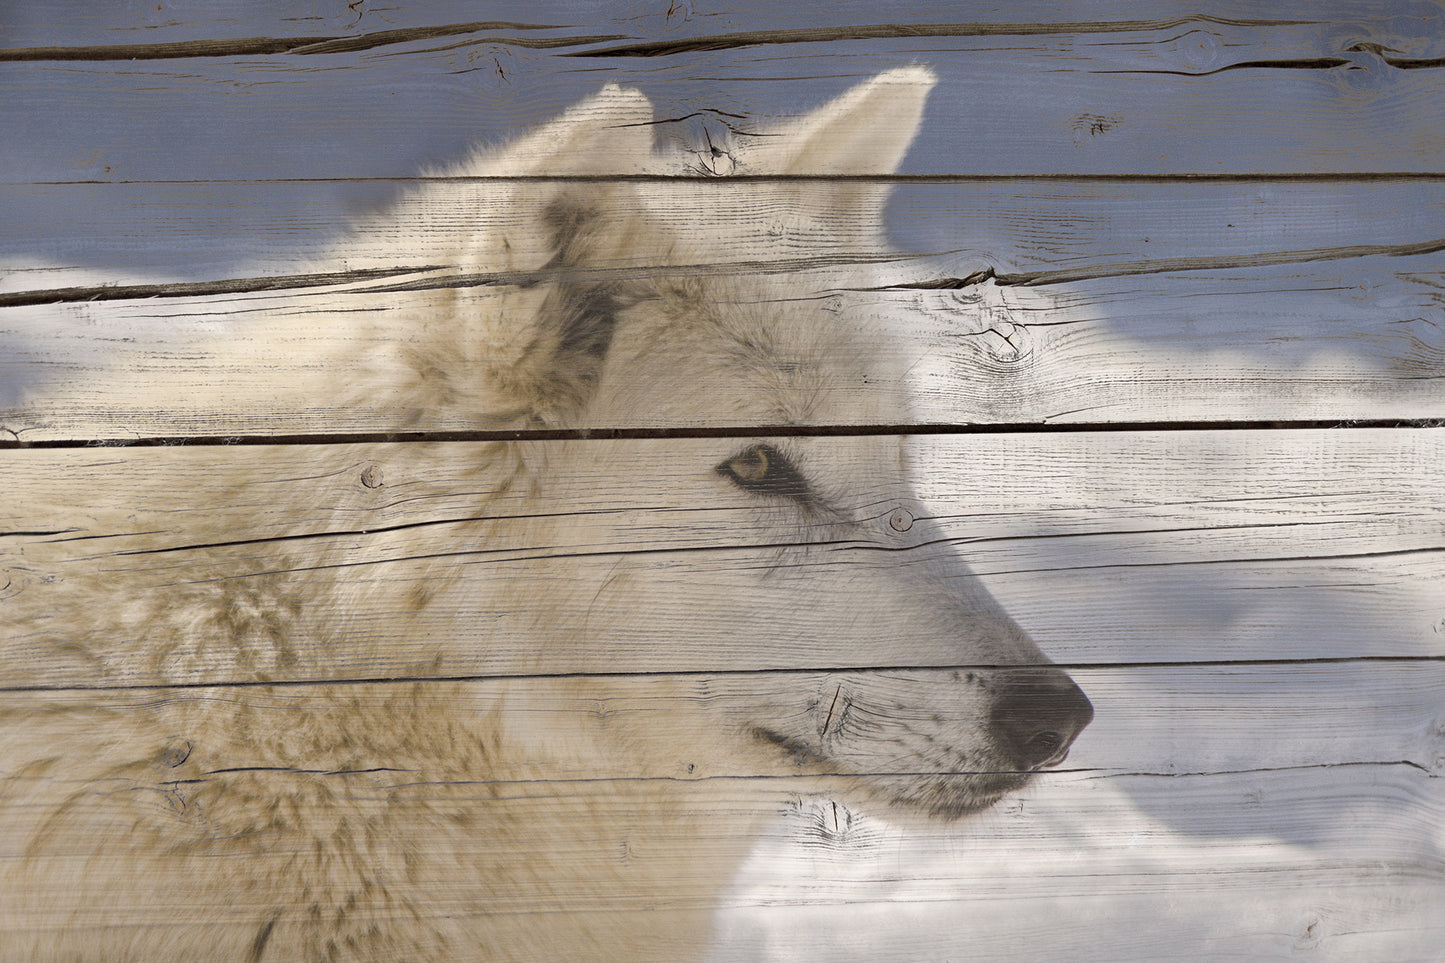 Wall Art Sale: Aries the White Wolf Portrait on Faux Weathered Wood Texture / Animal / Wildlife / Nature Photographic Artwork - Framed Artwork - Wall Decor